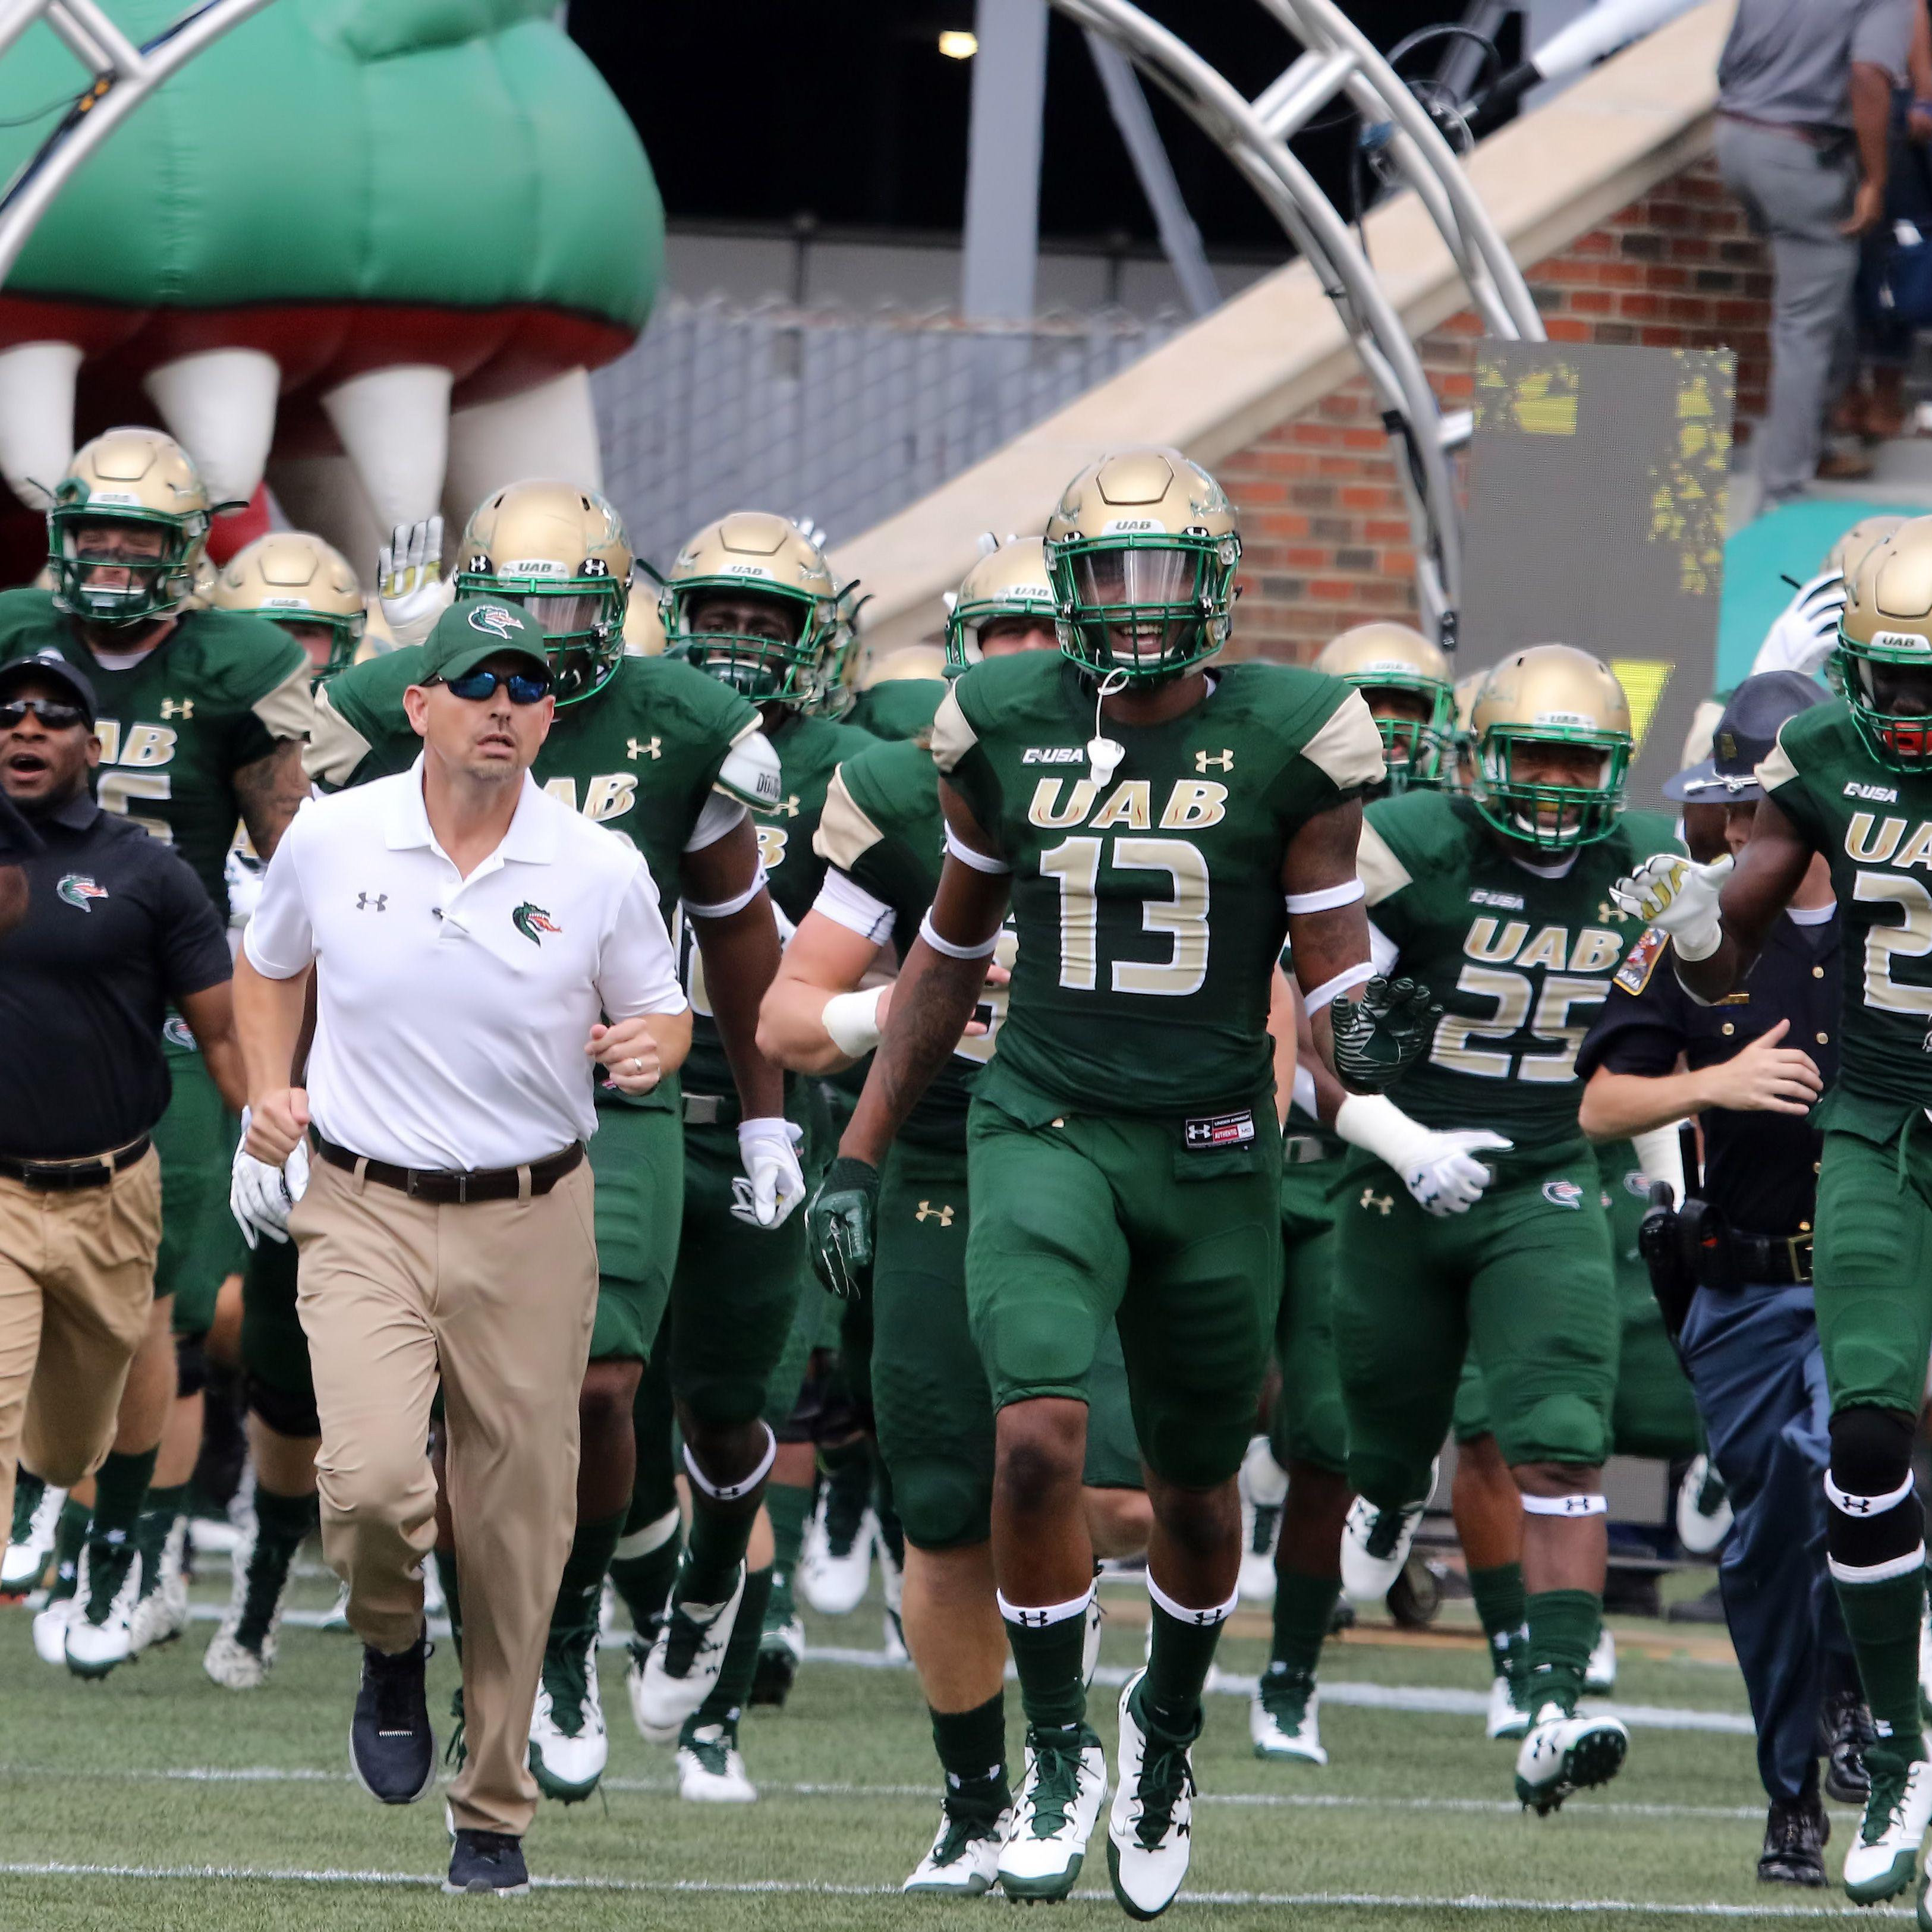 Here's why UAB football died and is already rising again